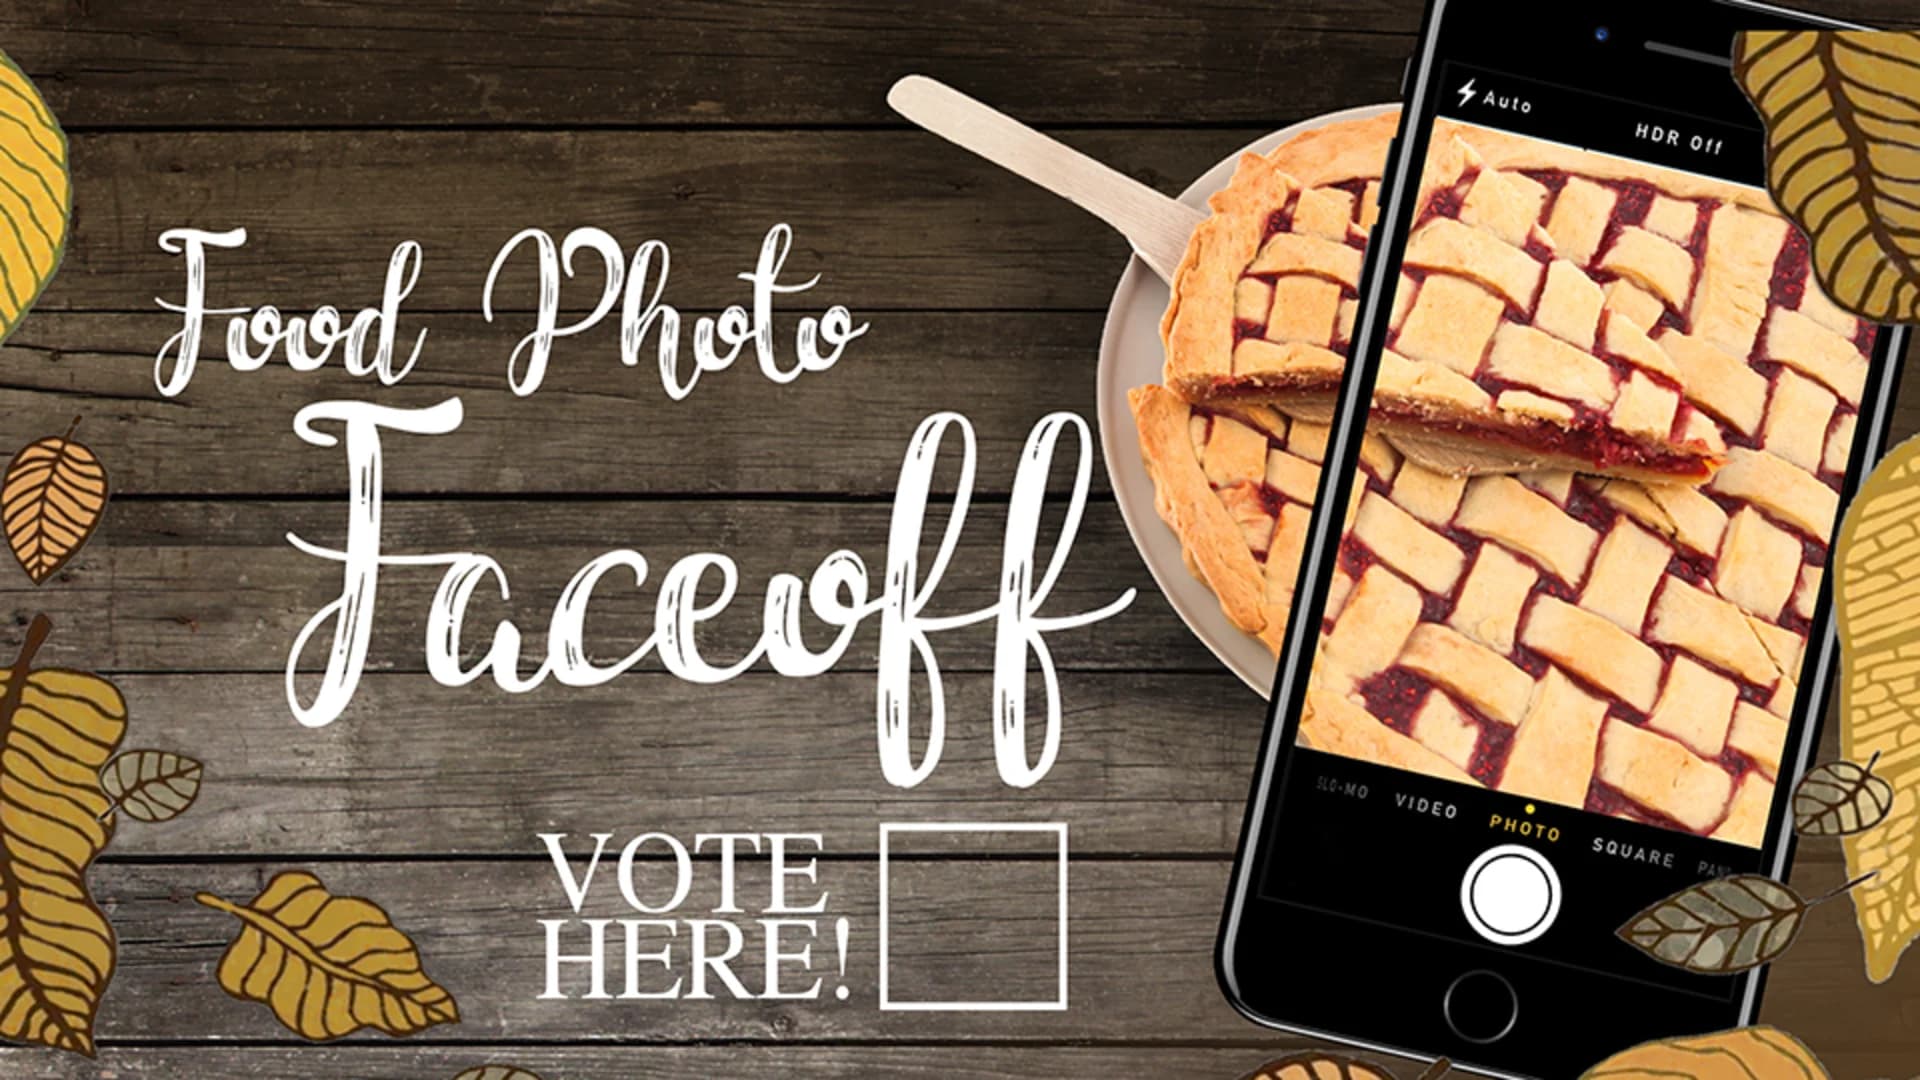 Food Photo Faceoff voting ends